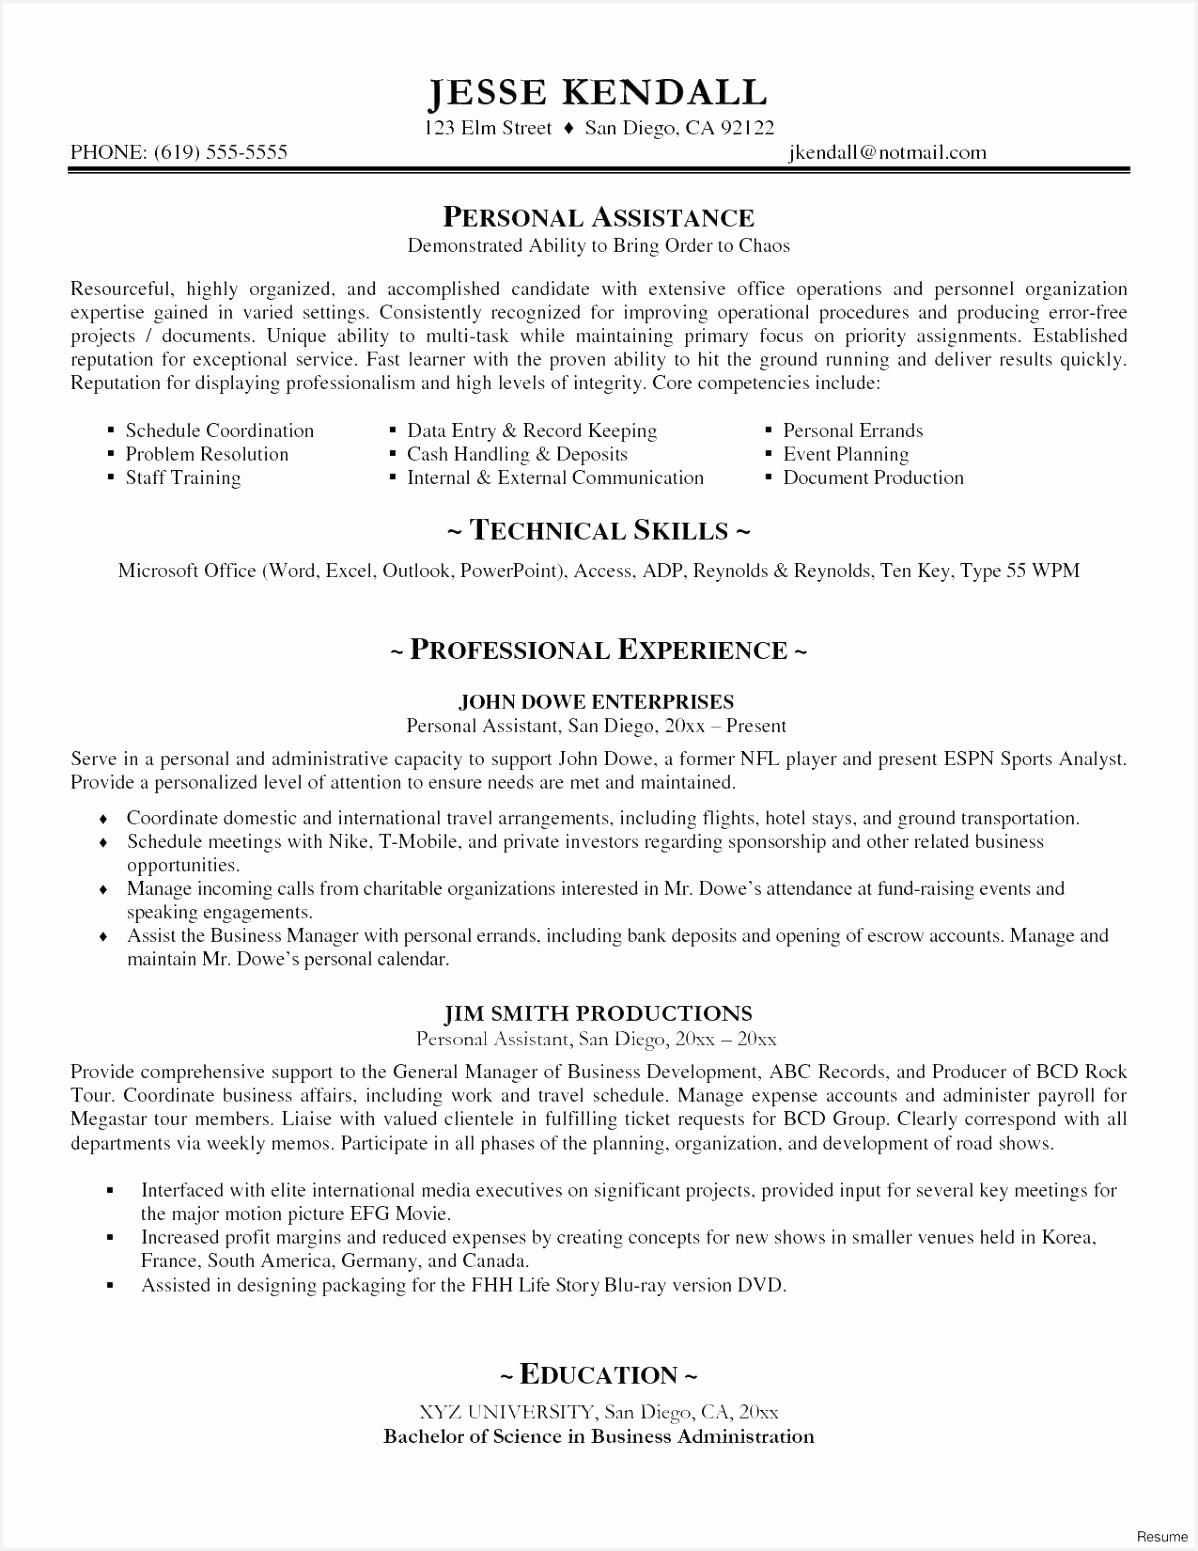 Sample Entry Level Resume Fresh Beautiful Entry Level Resume sorority Resume 0d Journalism Resume Business Administrator 15511198aclle